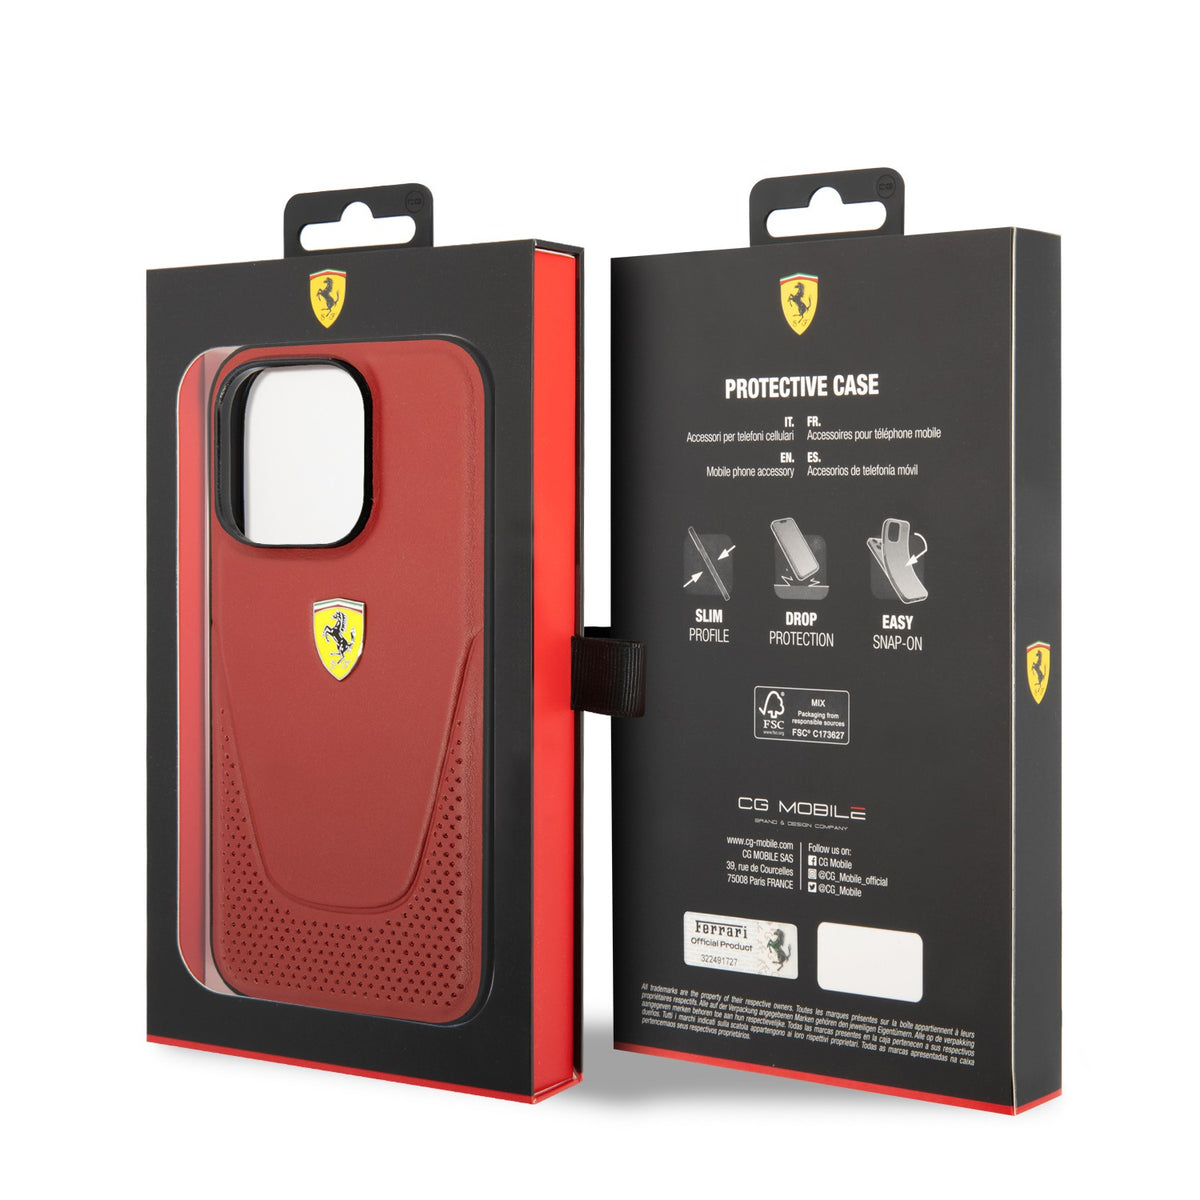 Ferrari Leather Vici Perforated Hard Case for iPhone , 14 Pro Max